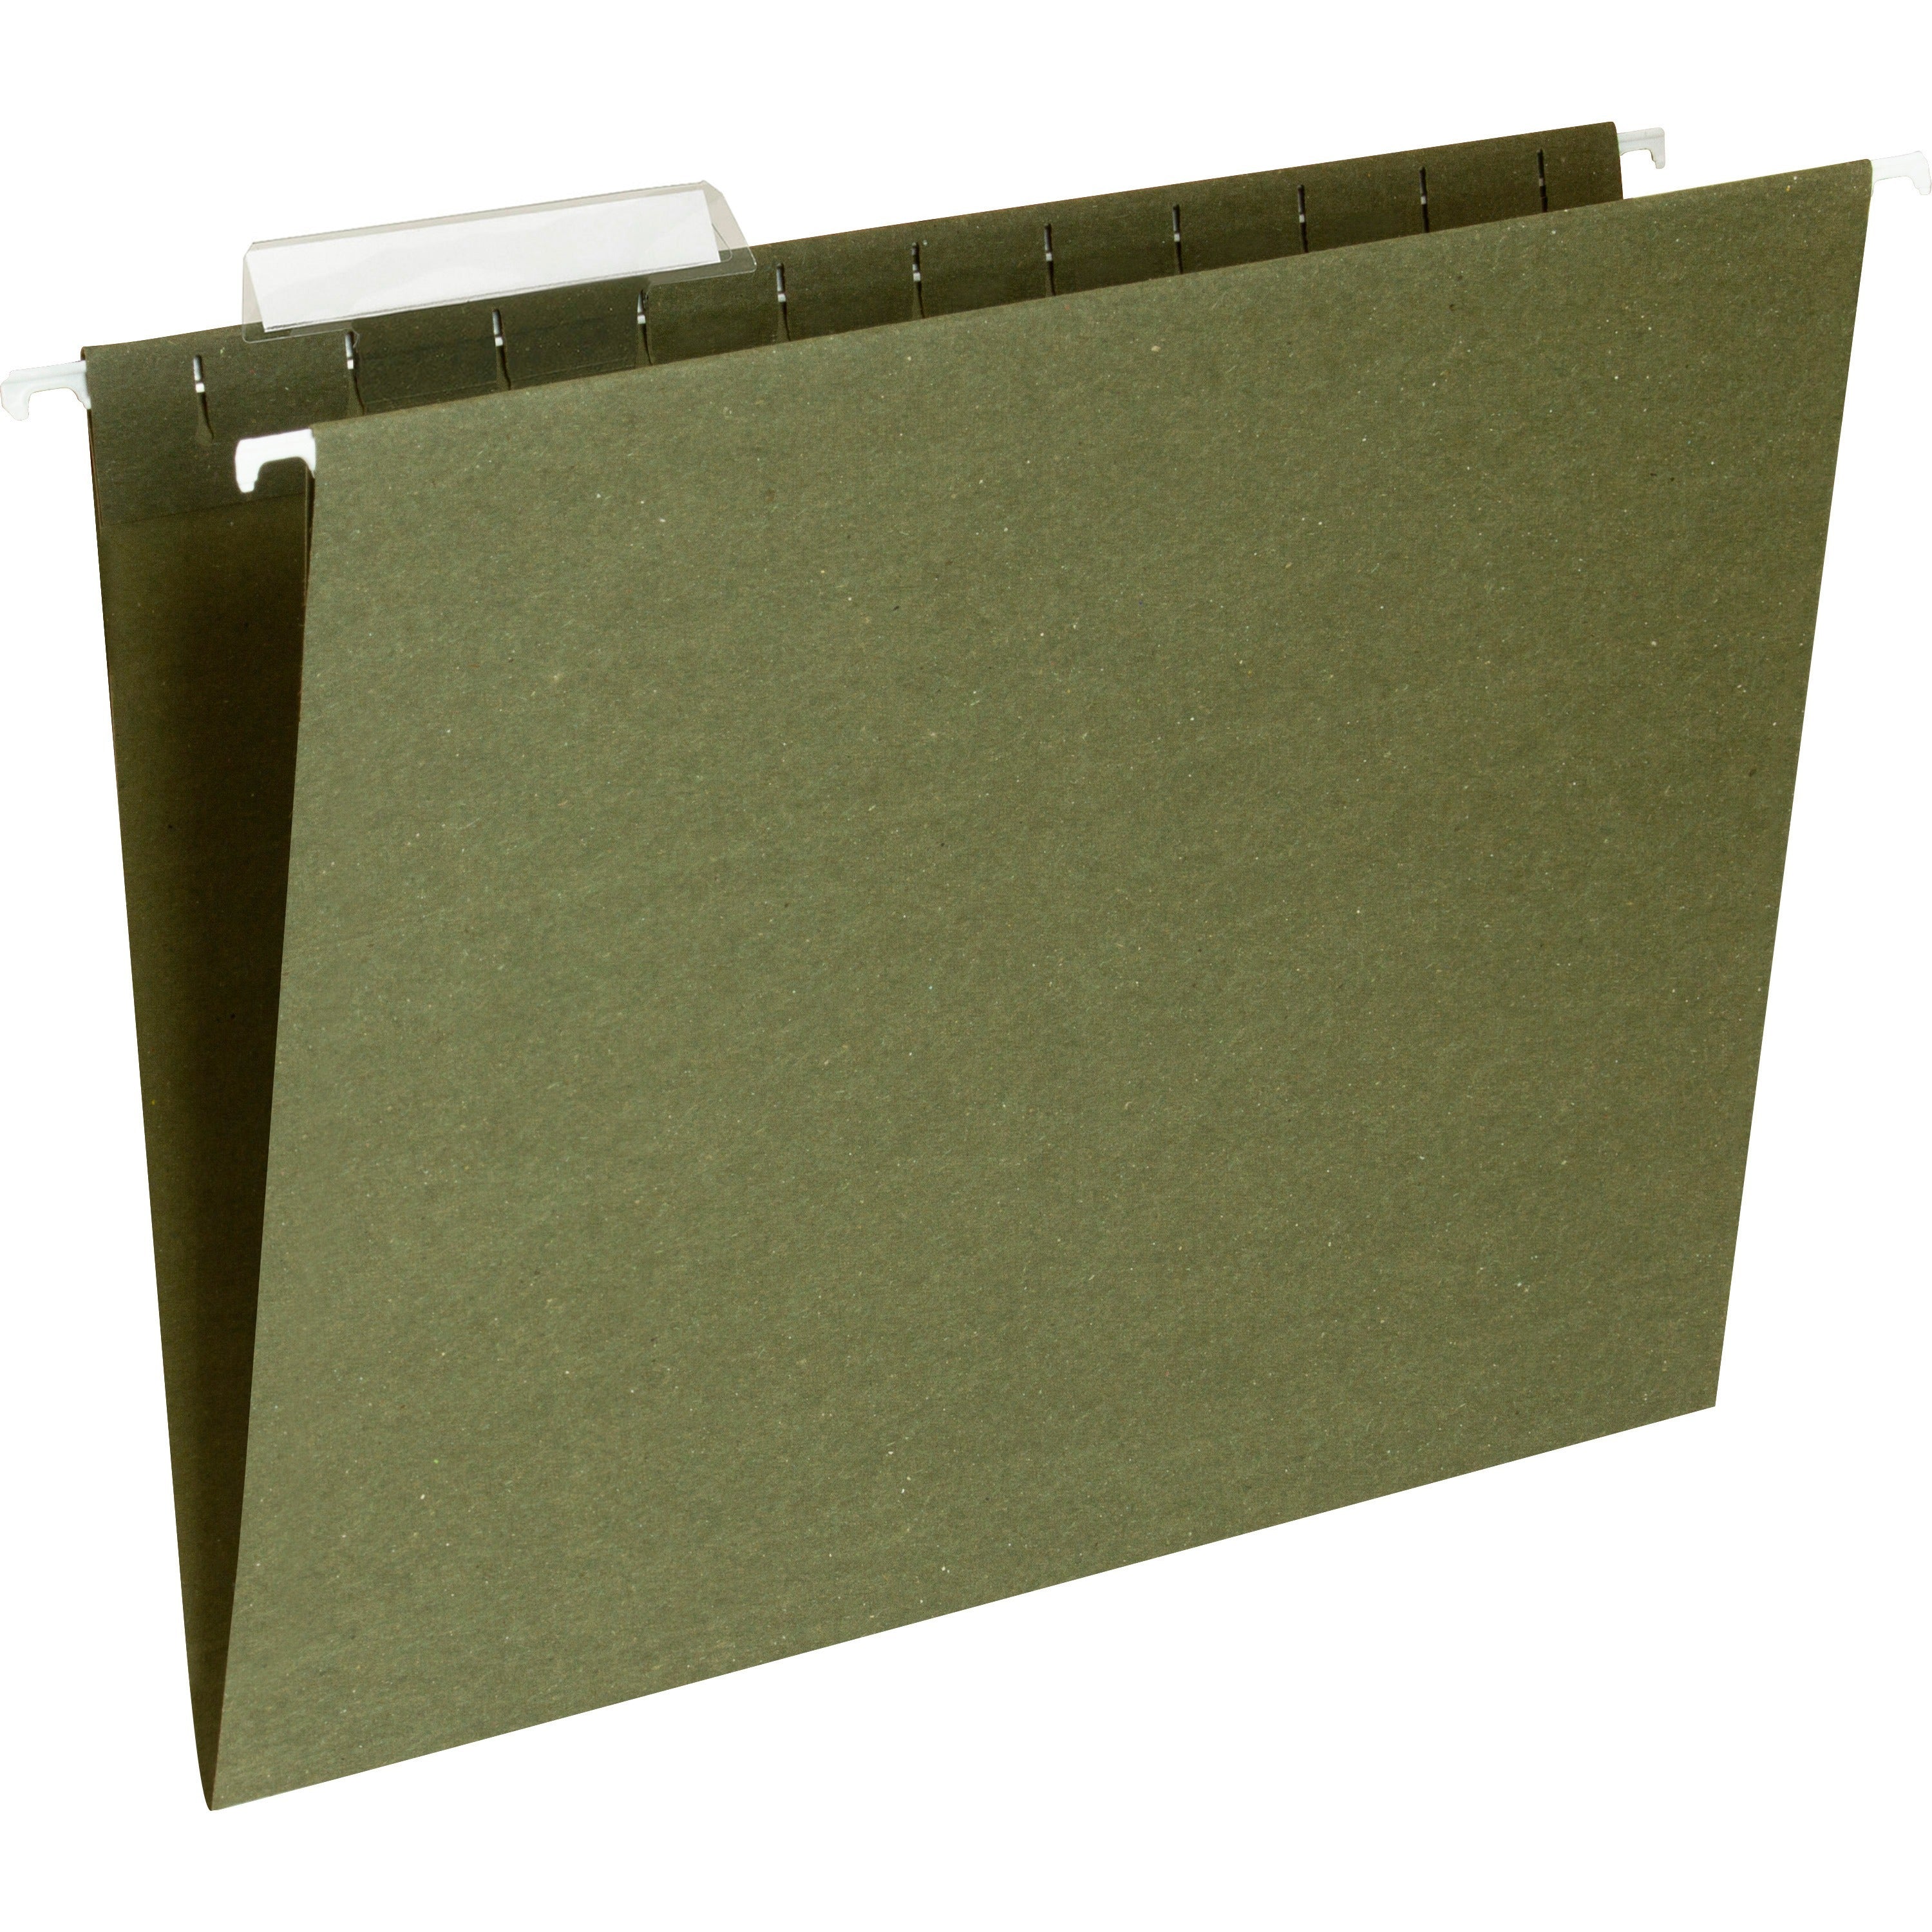 Business Source 1/3 Tab Cut Letter Recycled Hanging Folder - 8 1/2" x 11" - Standard Green - 100% Recycled - 25 / Box - 